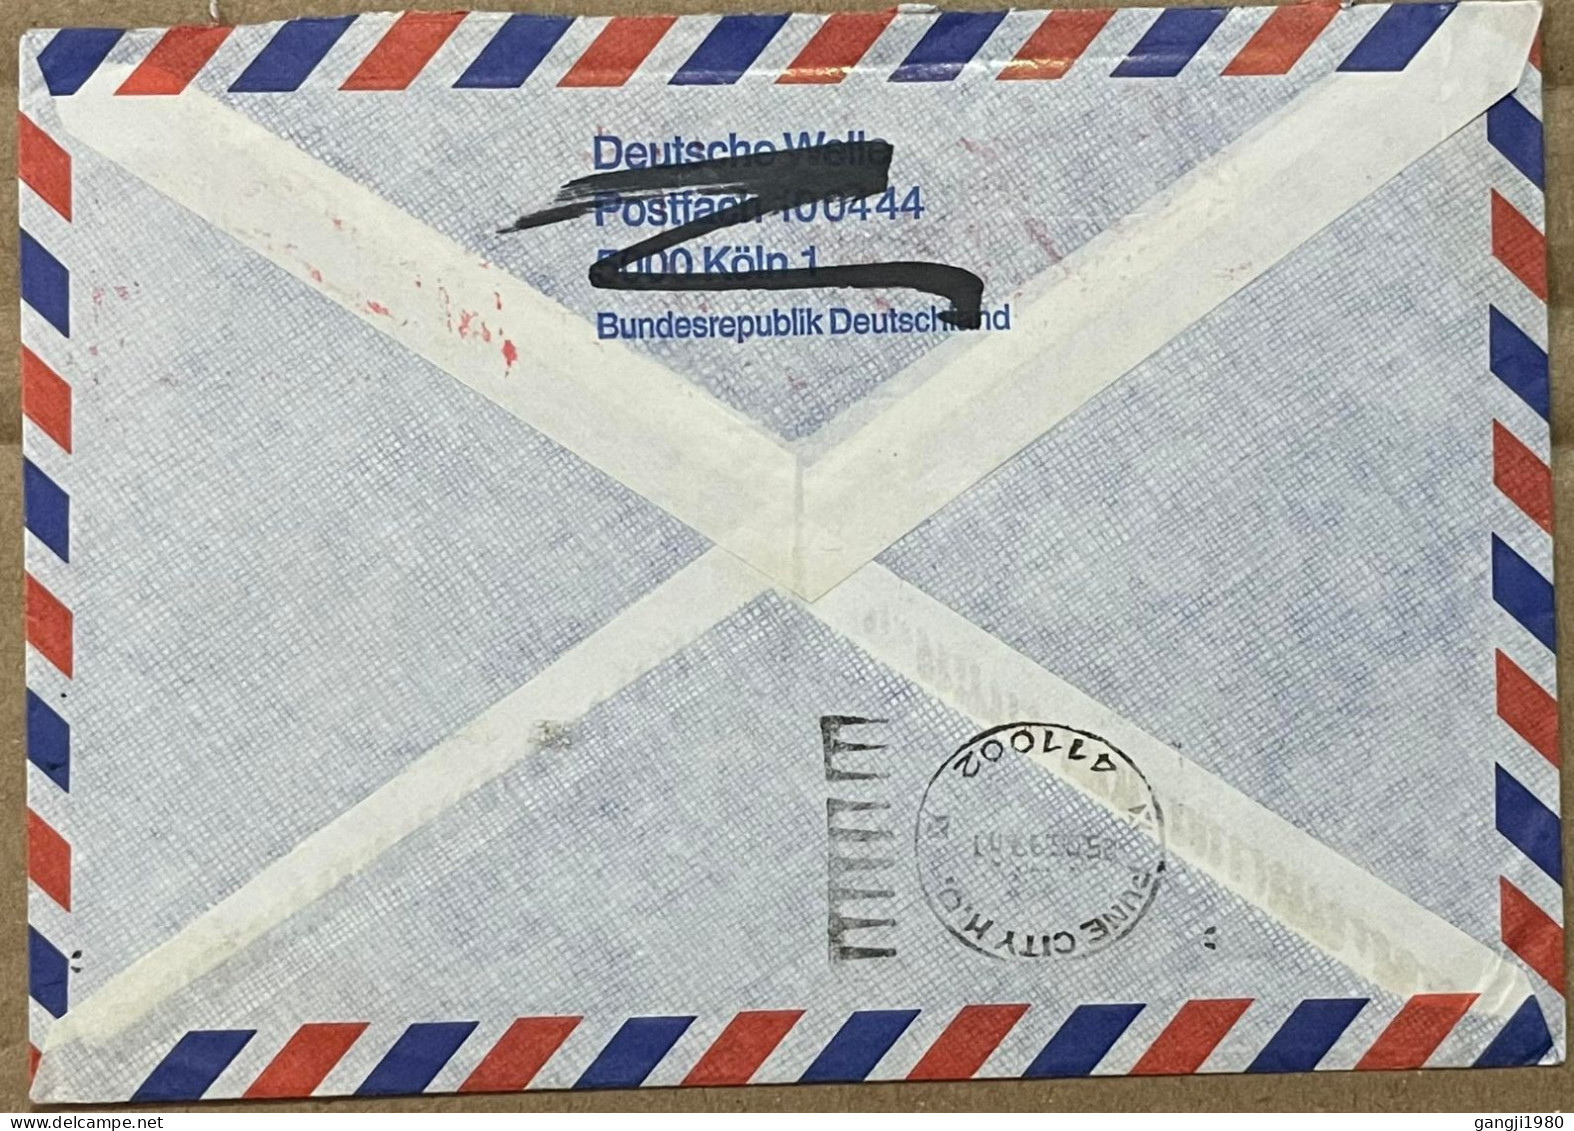 HONG KONG 1999, COVER USED TO INDIA, METER MACHINE SLOGAN CANCEL, MAIL FAST AIRMAIL PRINTED MATTER, POSTAGE PAID - Covers & Documents